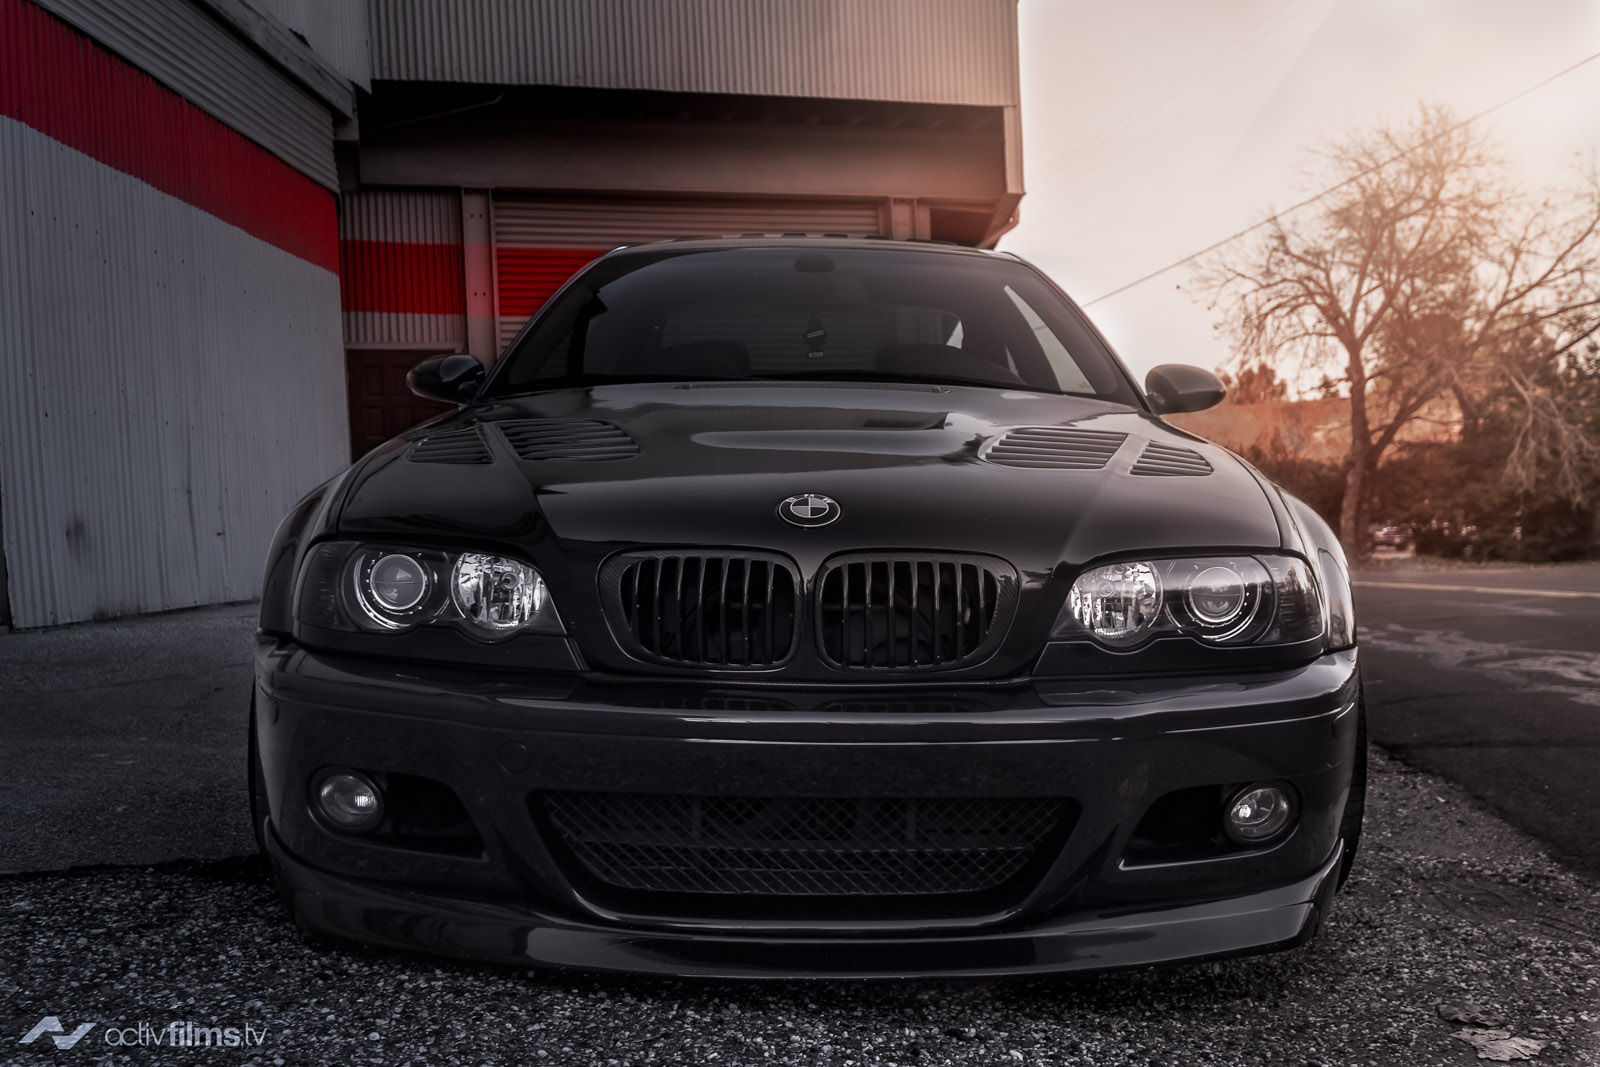 Wallpaper Bmw E92 M3 And E46 By Activfilms Tv